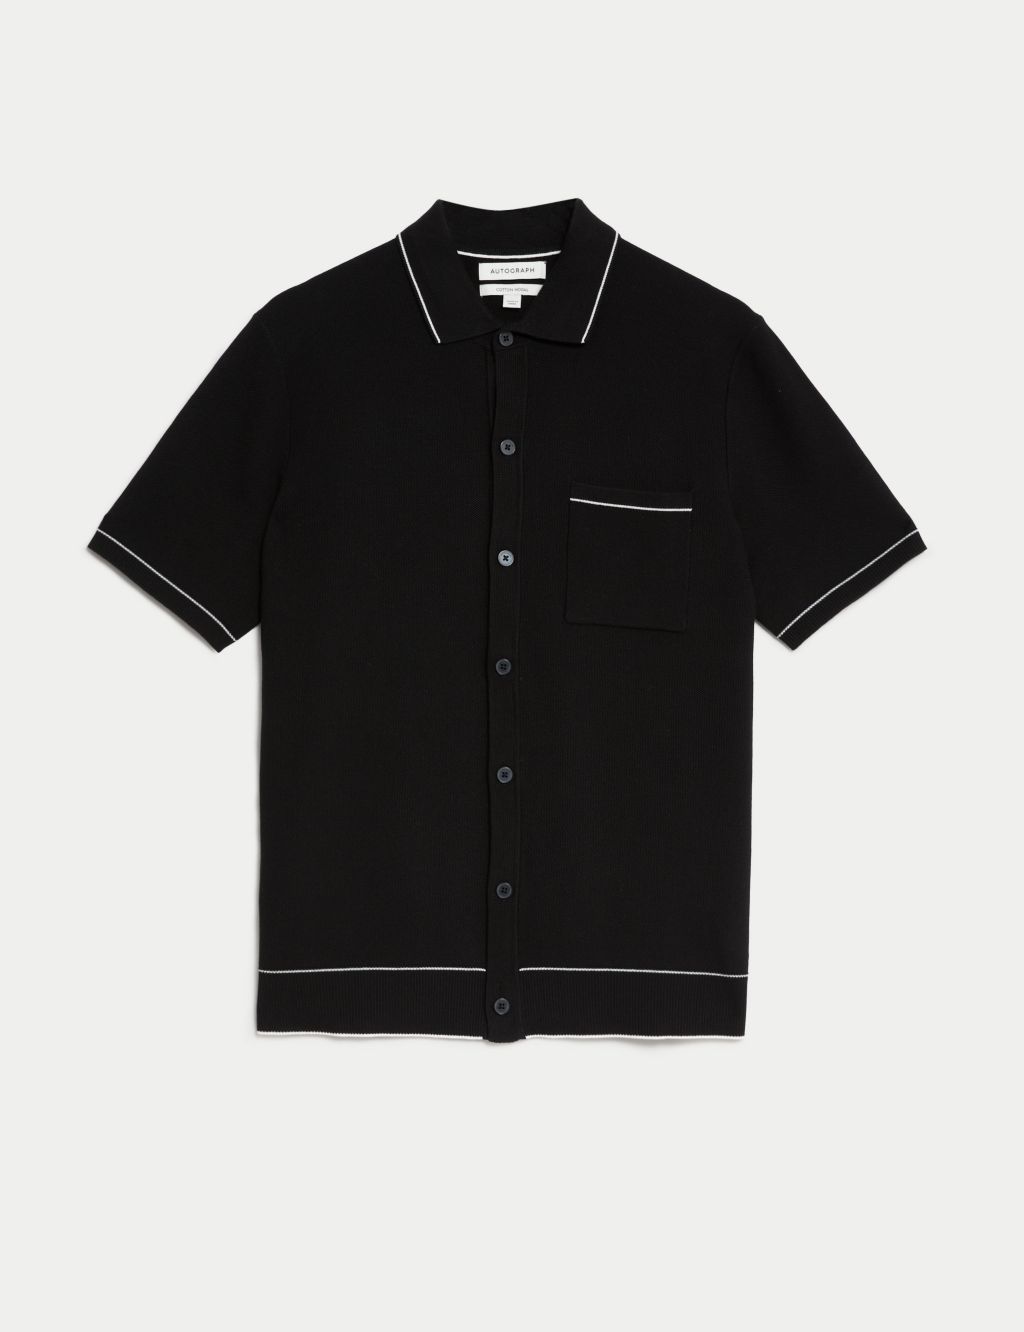 Cotton Modal Blend Knitted Polo Shirt | Autograph | M&S